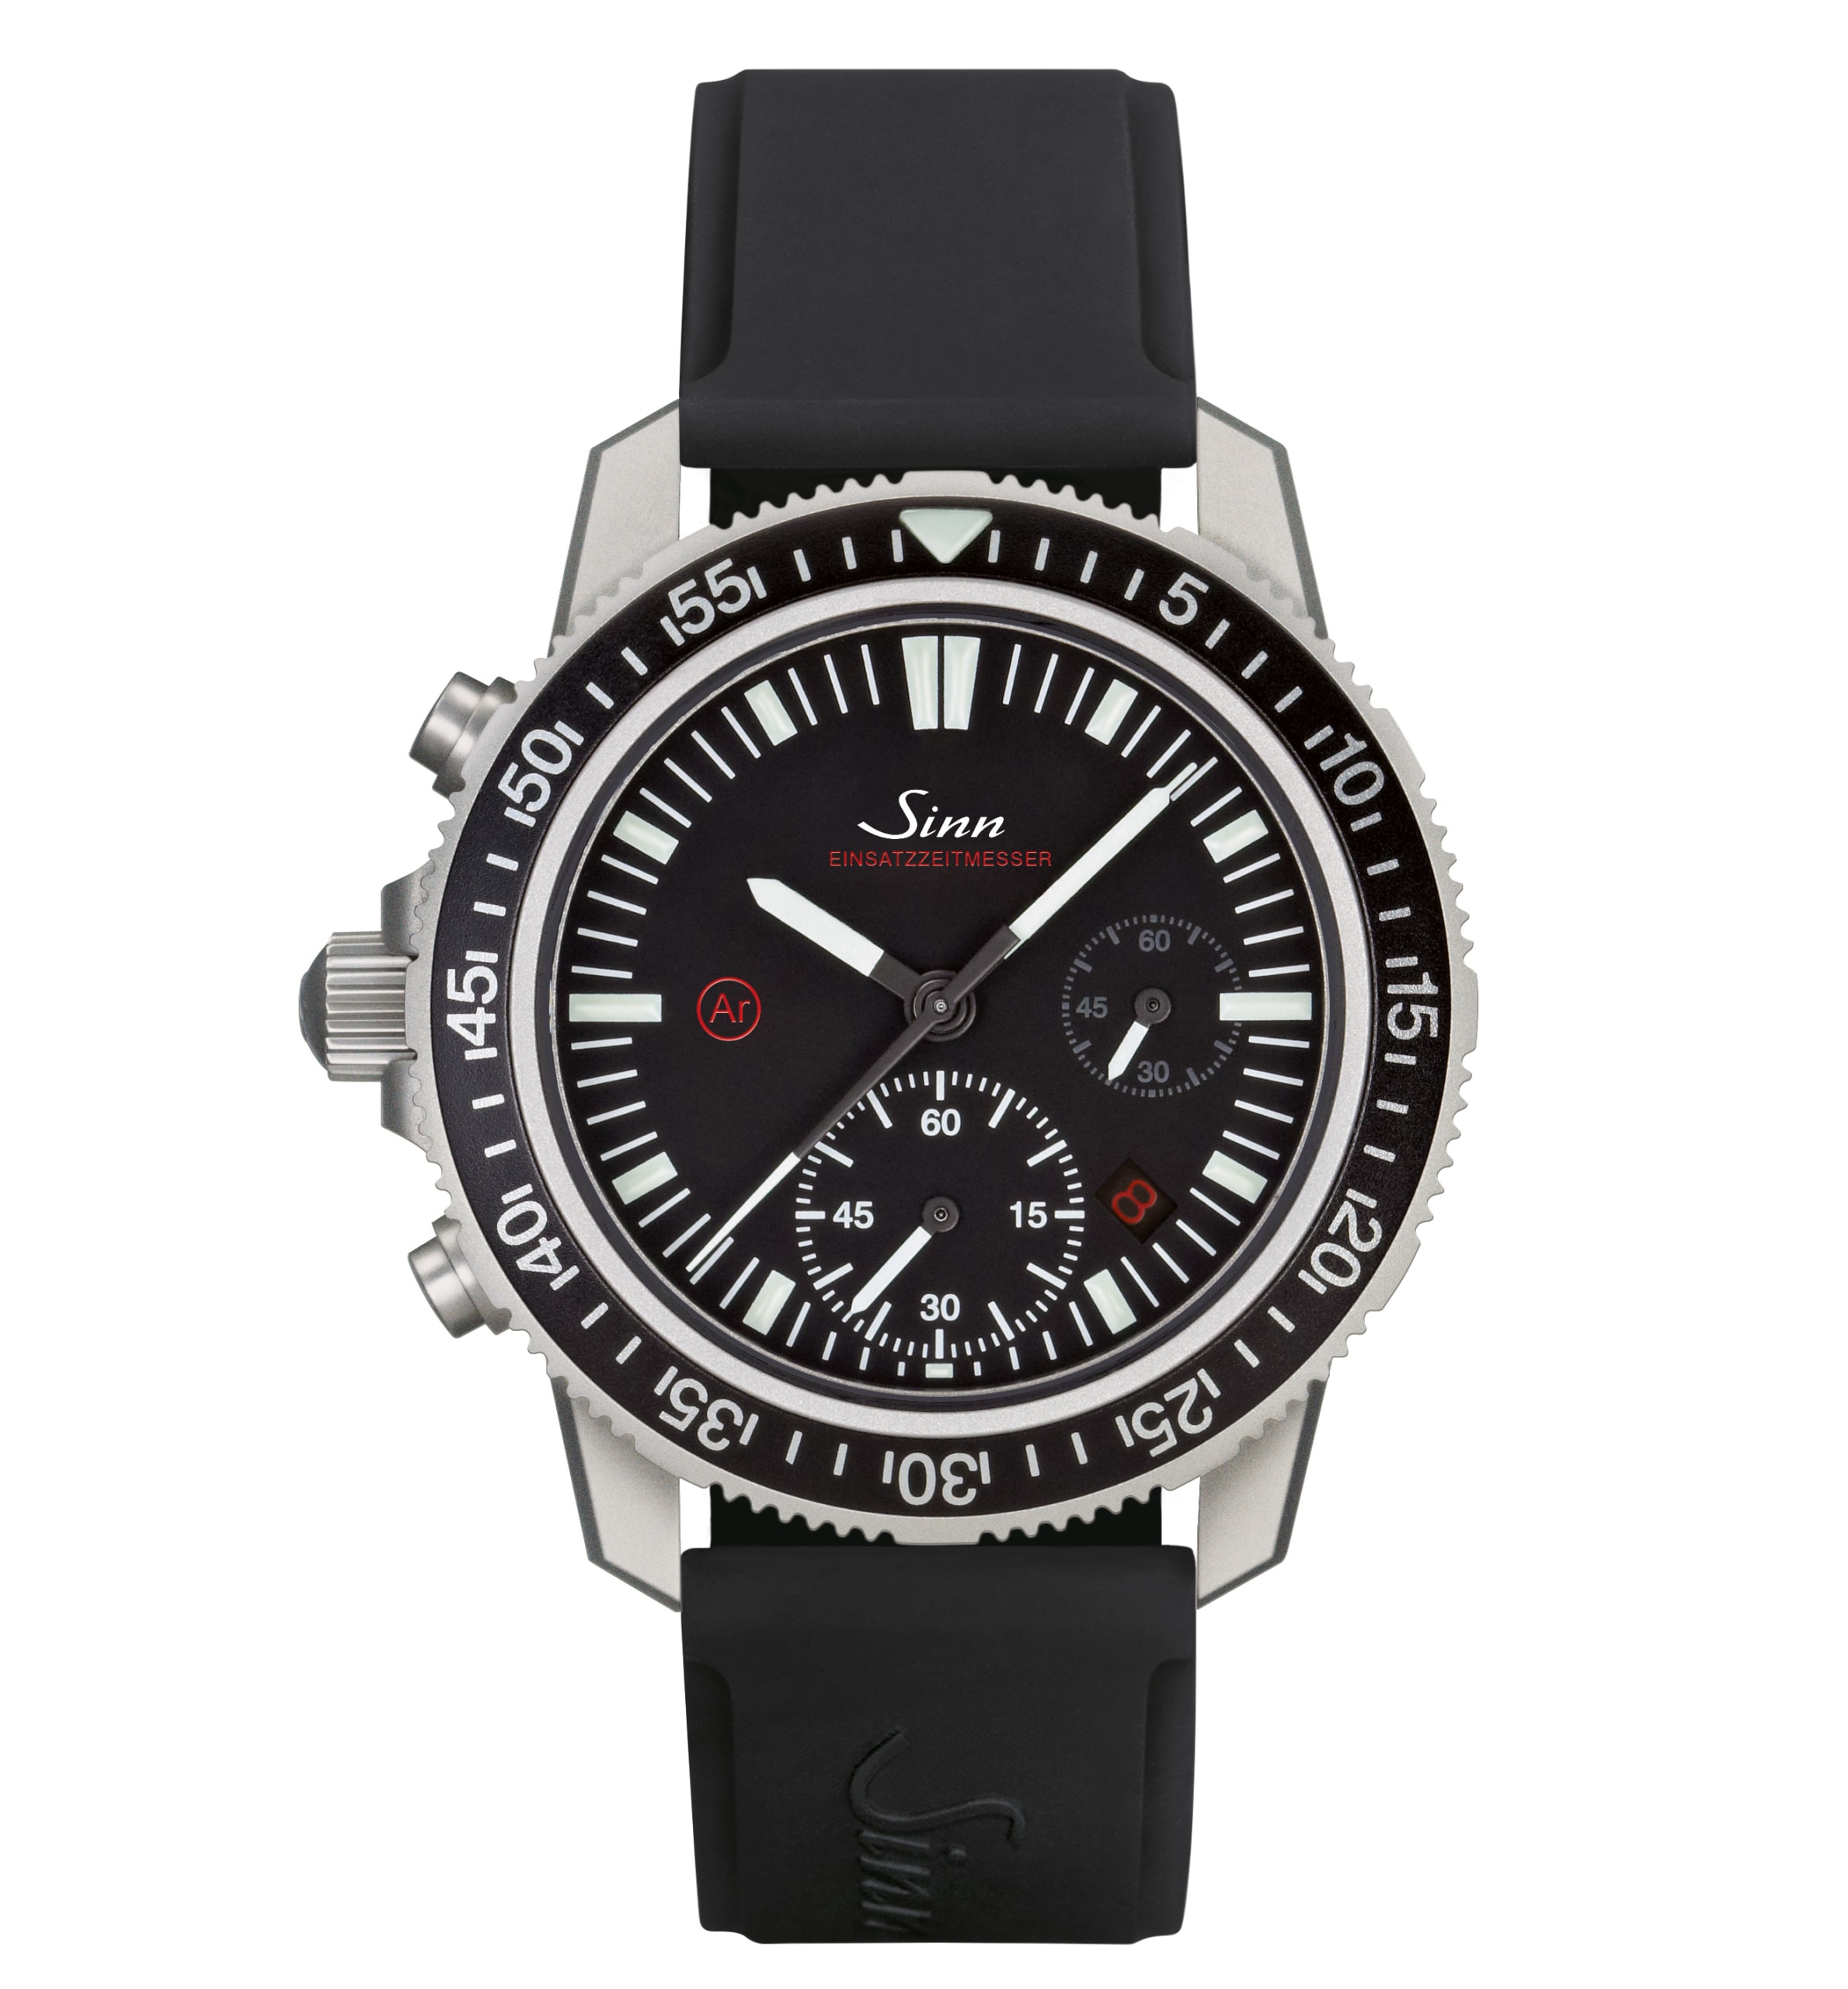 Sinn Brings Back a Favorite With New EZM 13.1 - Worn & Wound